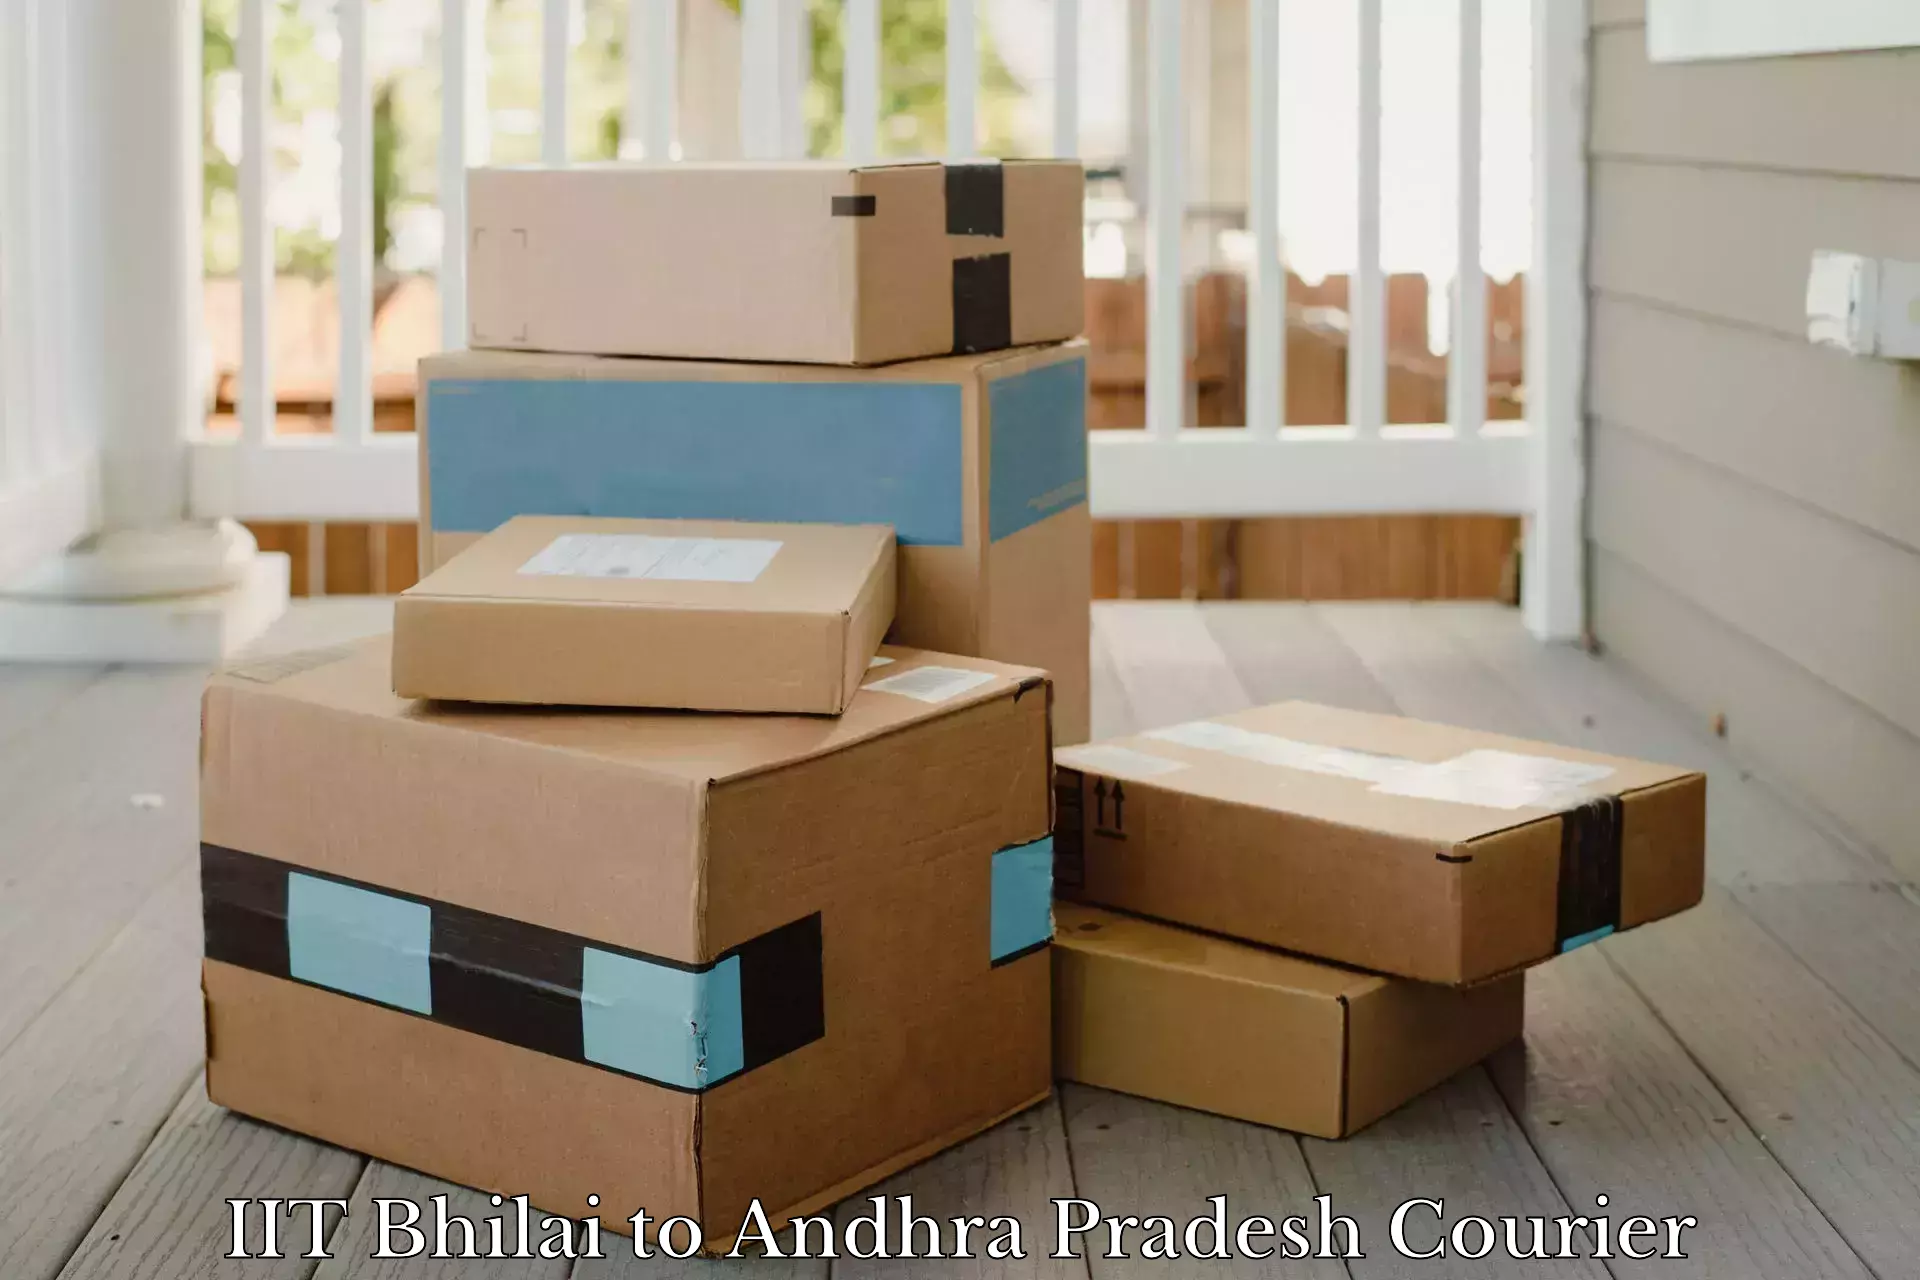 Postal and courier services in IIT Bhilai to Bobbili